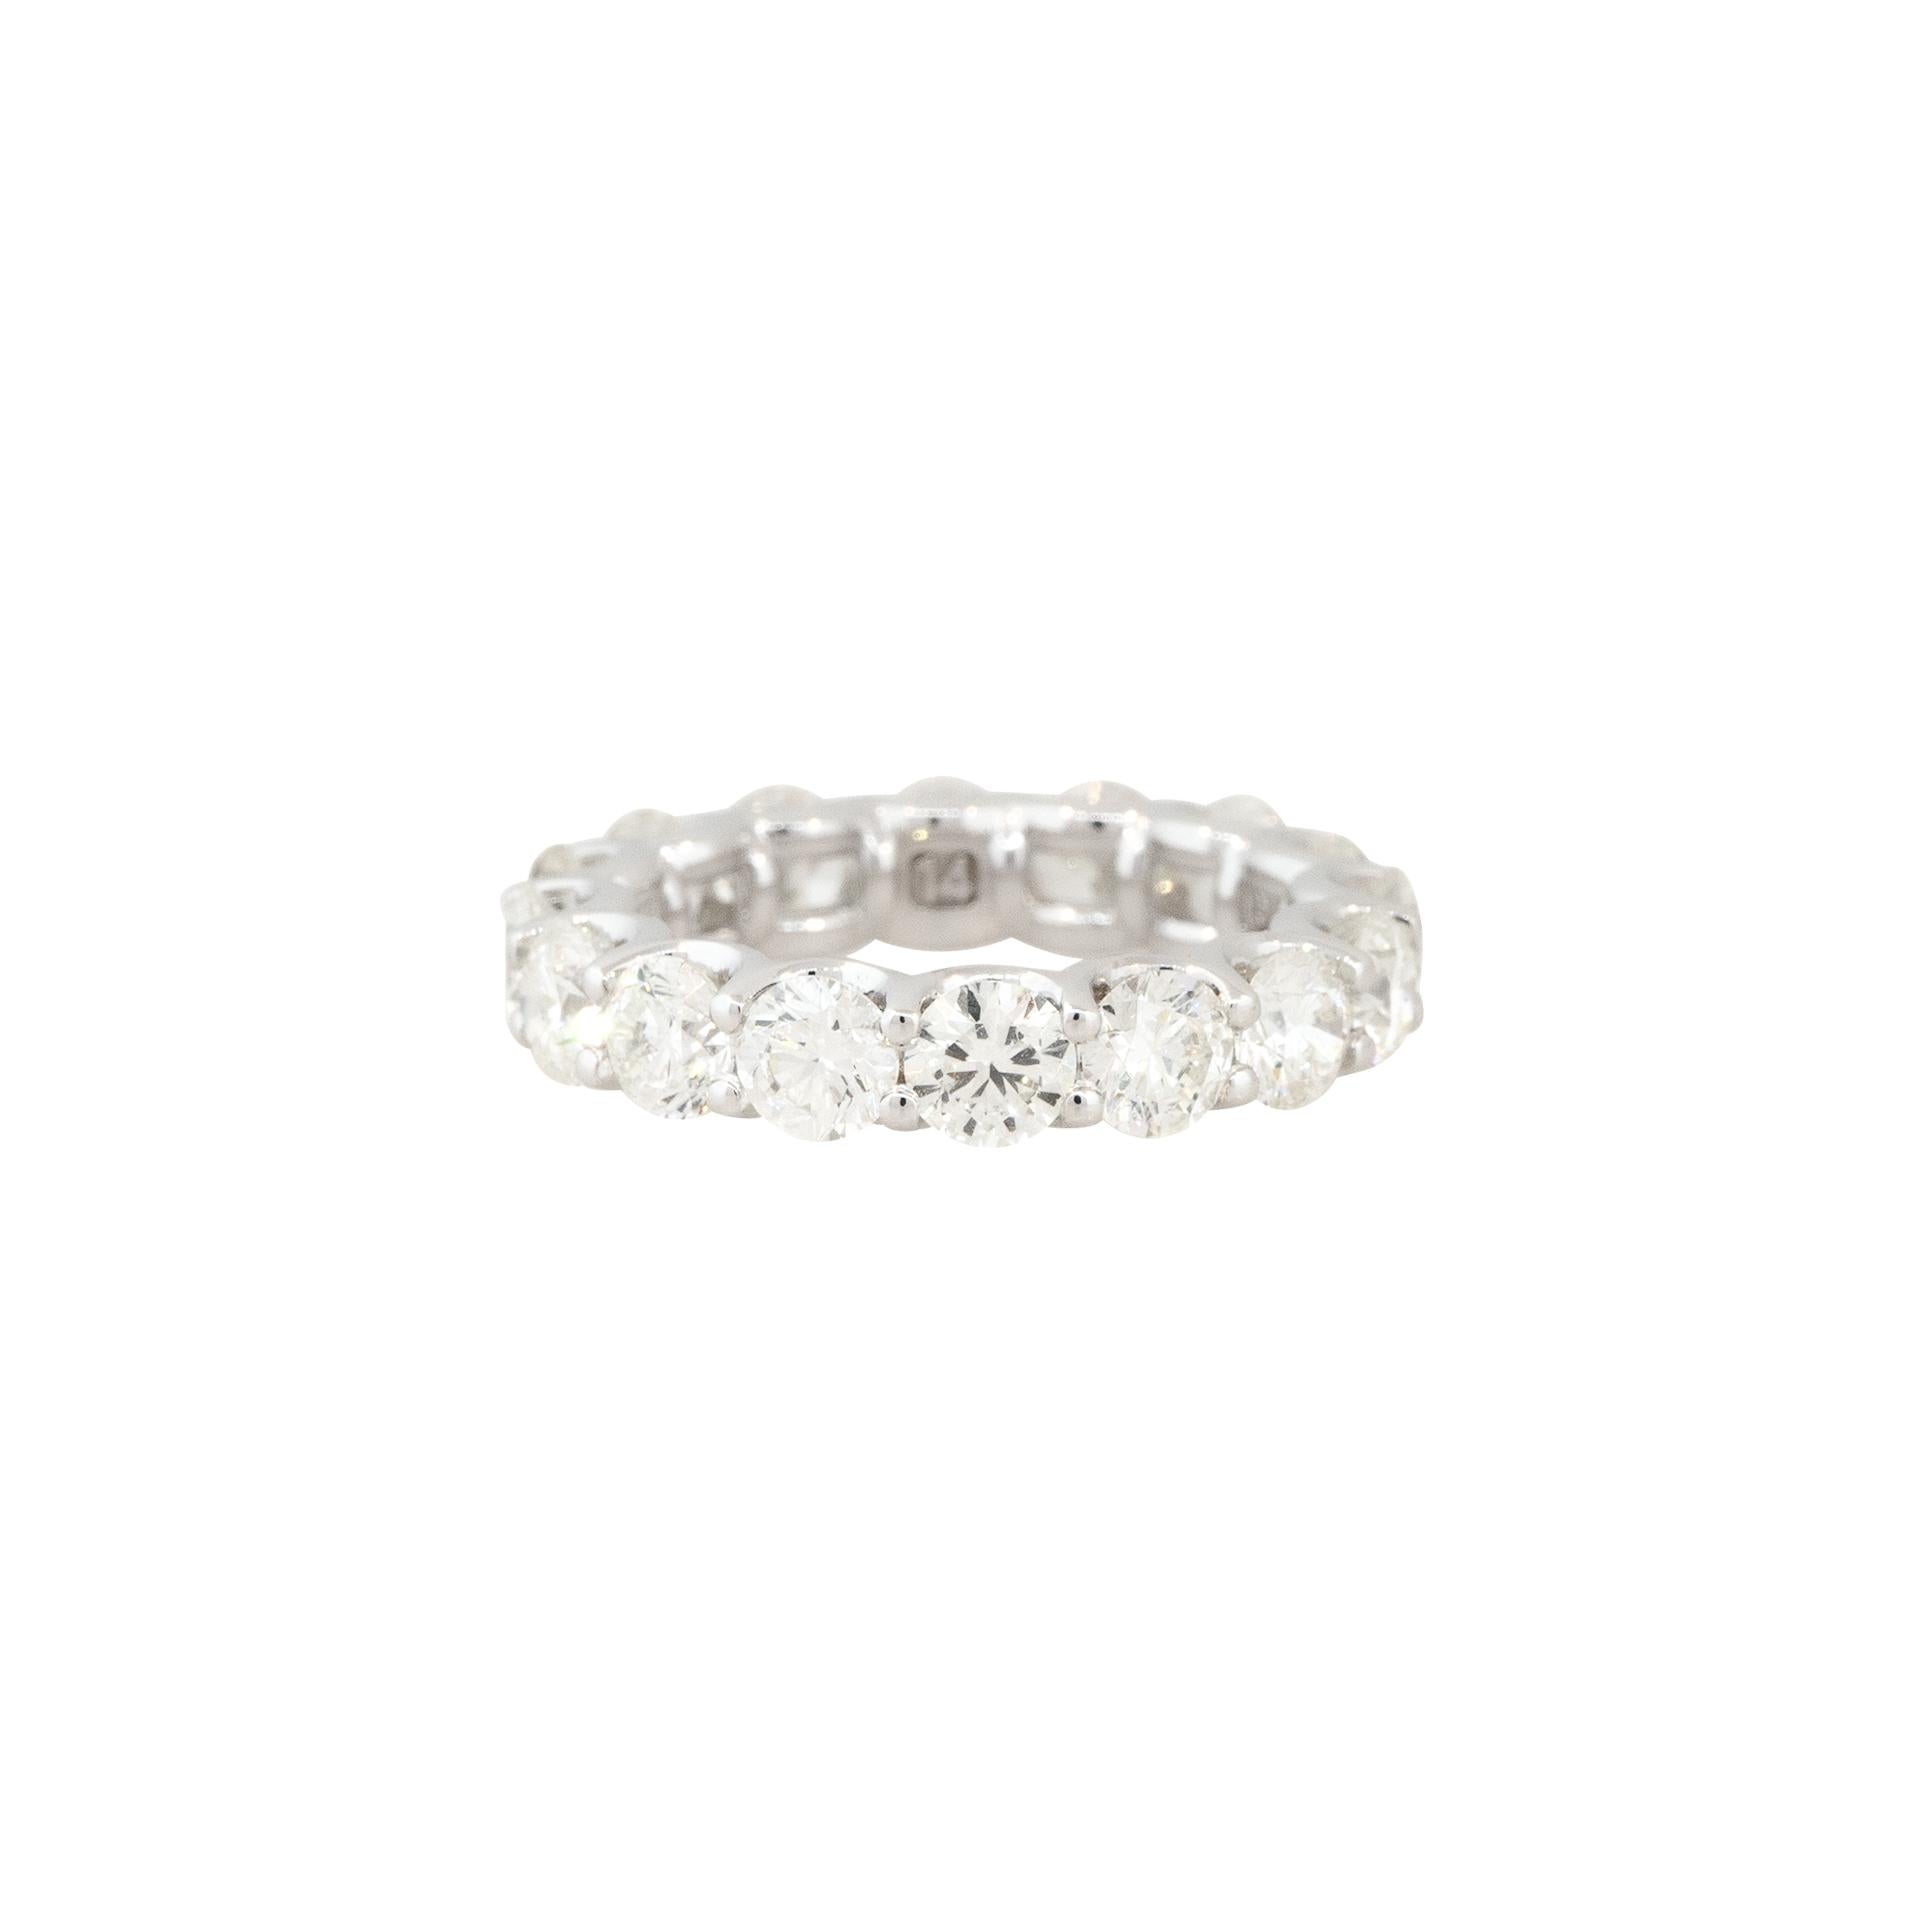 14k White Gold 5.04ctw Round Brilliant Cut Diamond Eternity Band

Style: Women's Diamond Eternity Band
Material: 14k White Gold
Diamond Details: Approximately 5.04ctw of Round Brilliant Cut Diamonds. All Diamonds are prong set and there are 16